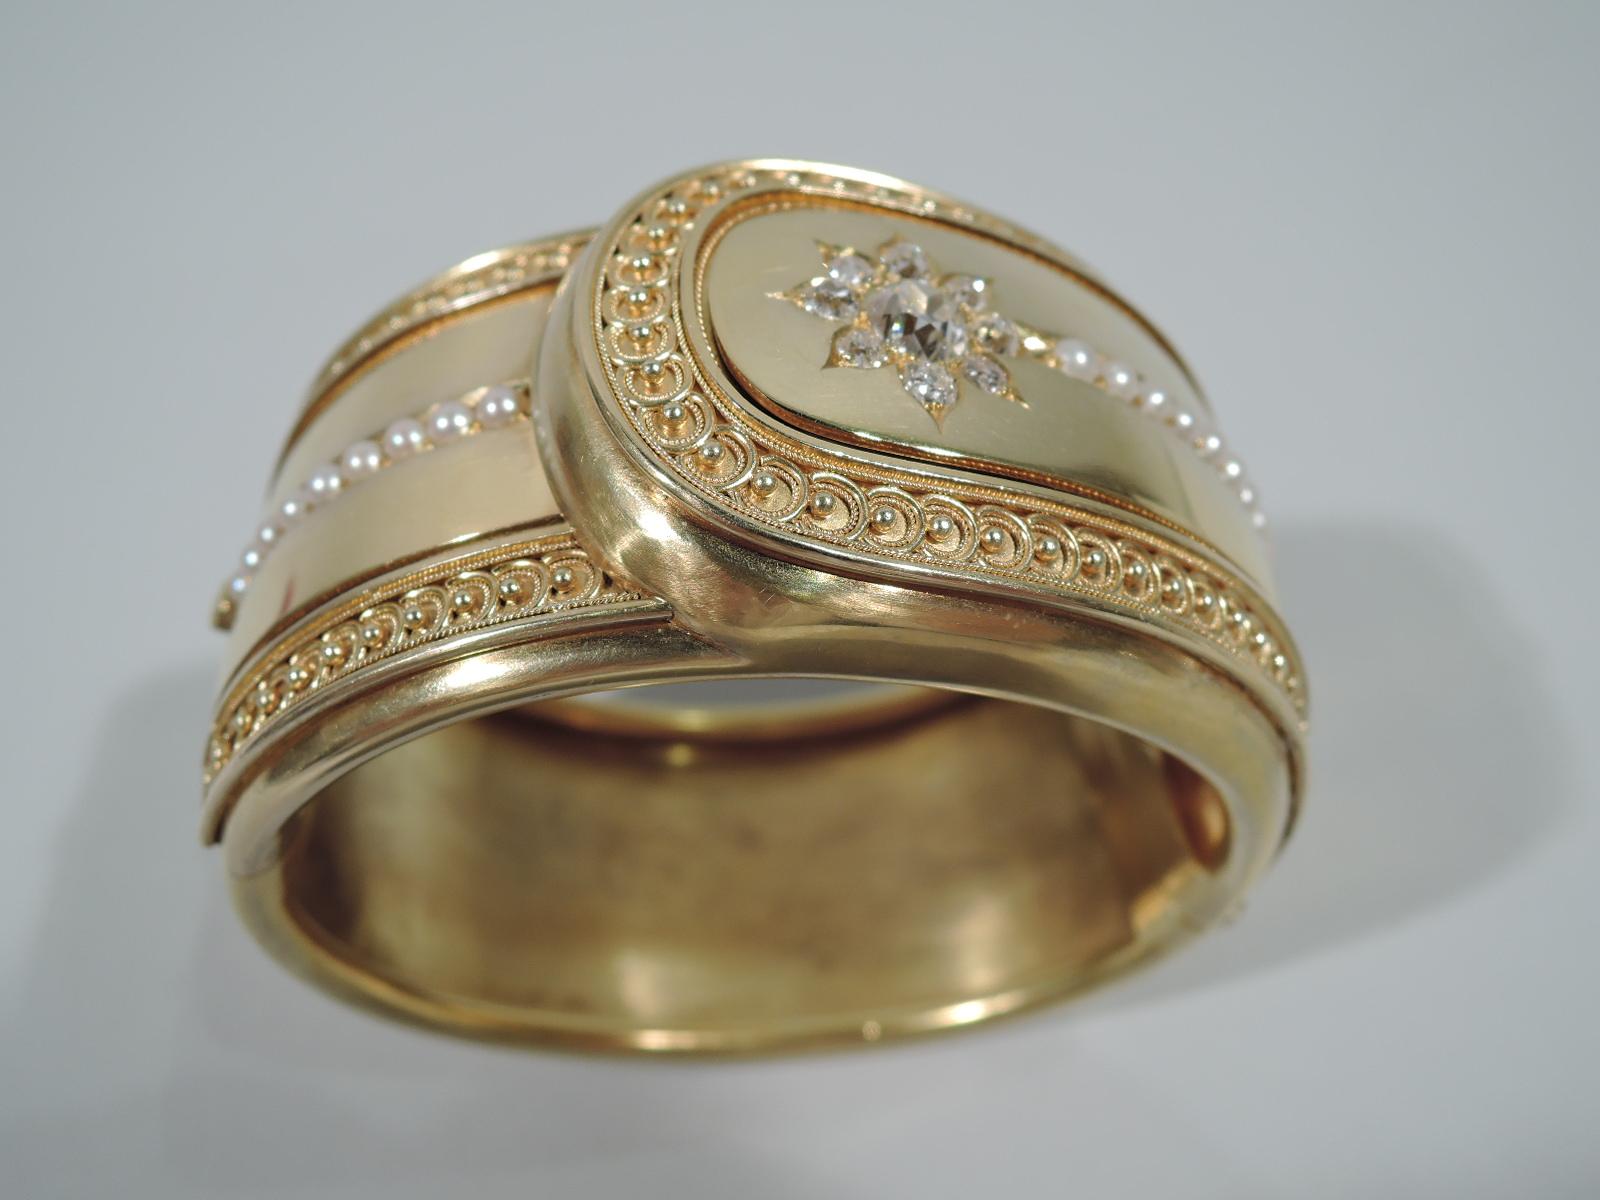 Victorian 18k gold cuff bracelet with applied rope and bead border and encrusted miner diamond starburst and seed pearls. England, ca 1880. 

Dimensions: Circumference 9 in x W 1 1/2 in. Heavy weight: 65 dwt.